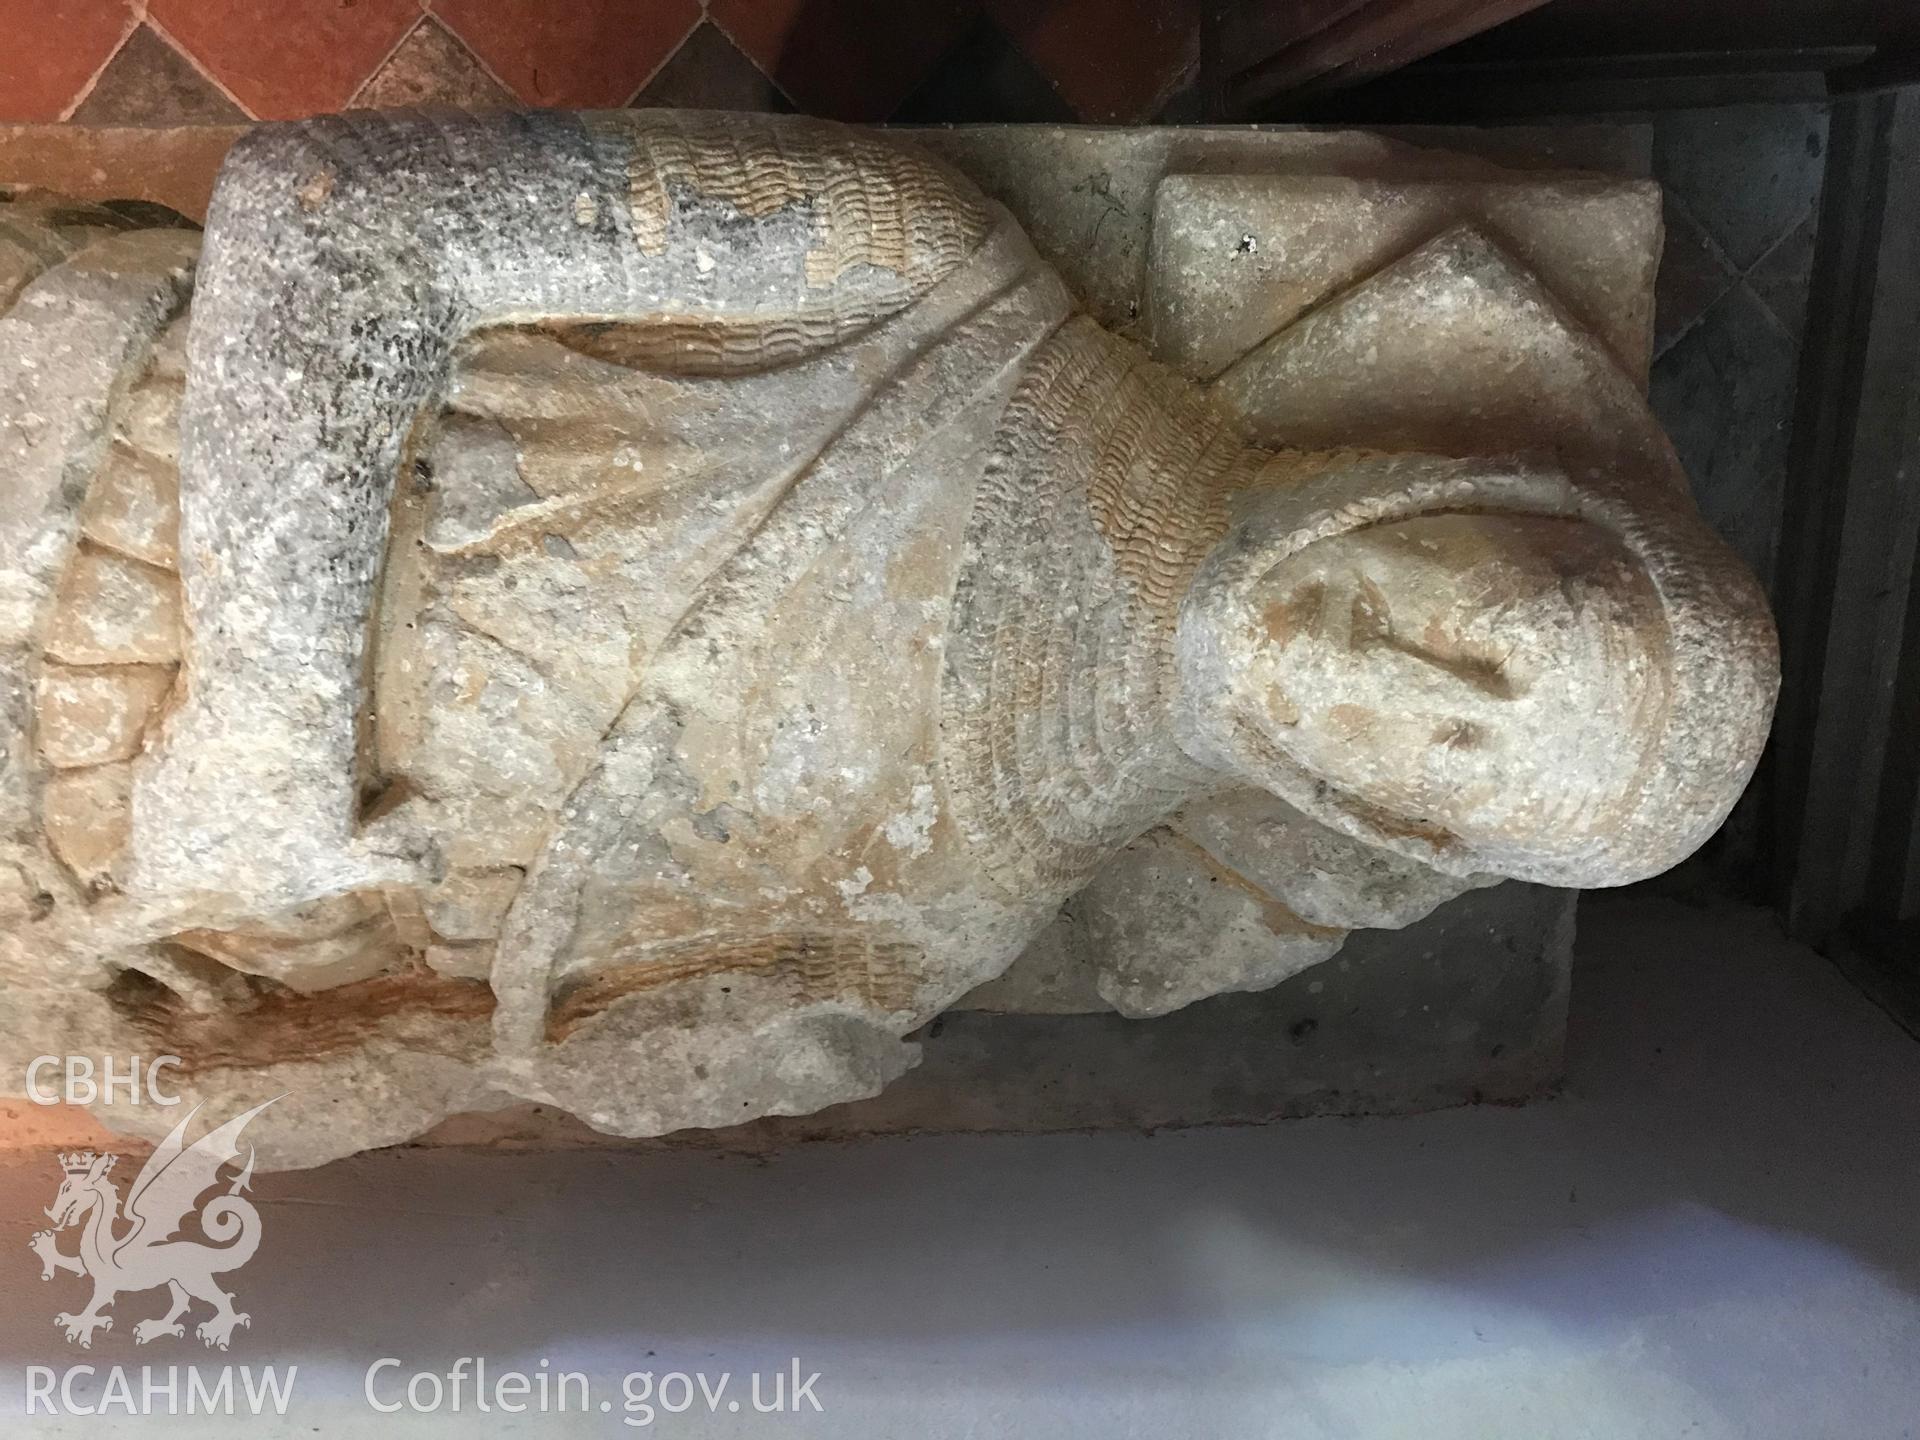 Colour photo showing carved stone tomb at St. Cenydd's Church, Llangenydd, taken by Paul R. Davis, 10th May 2018.